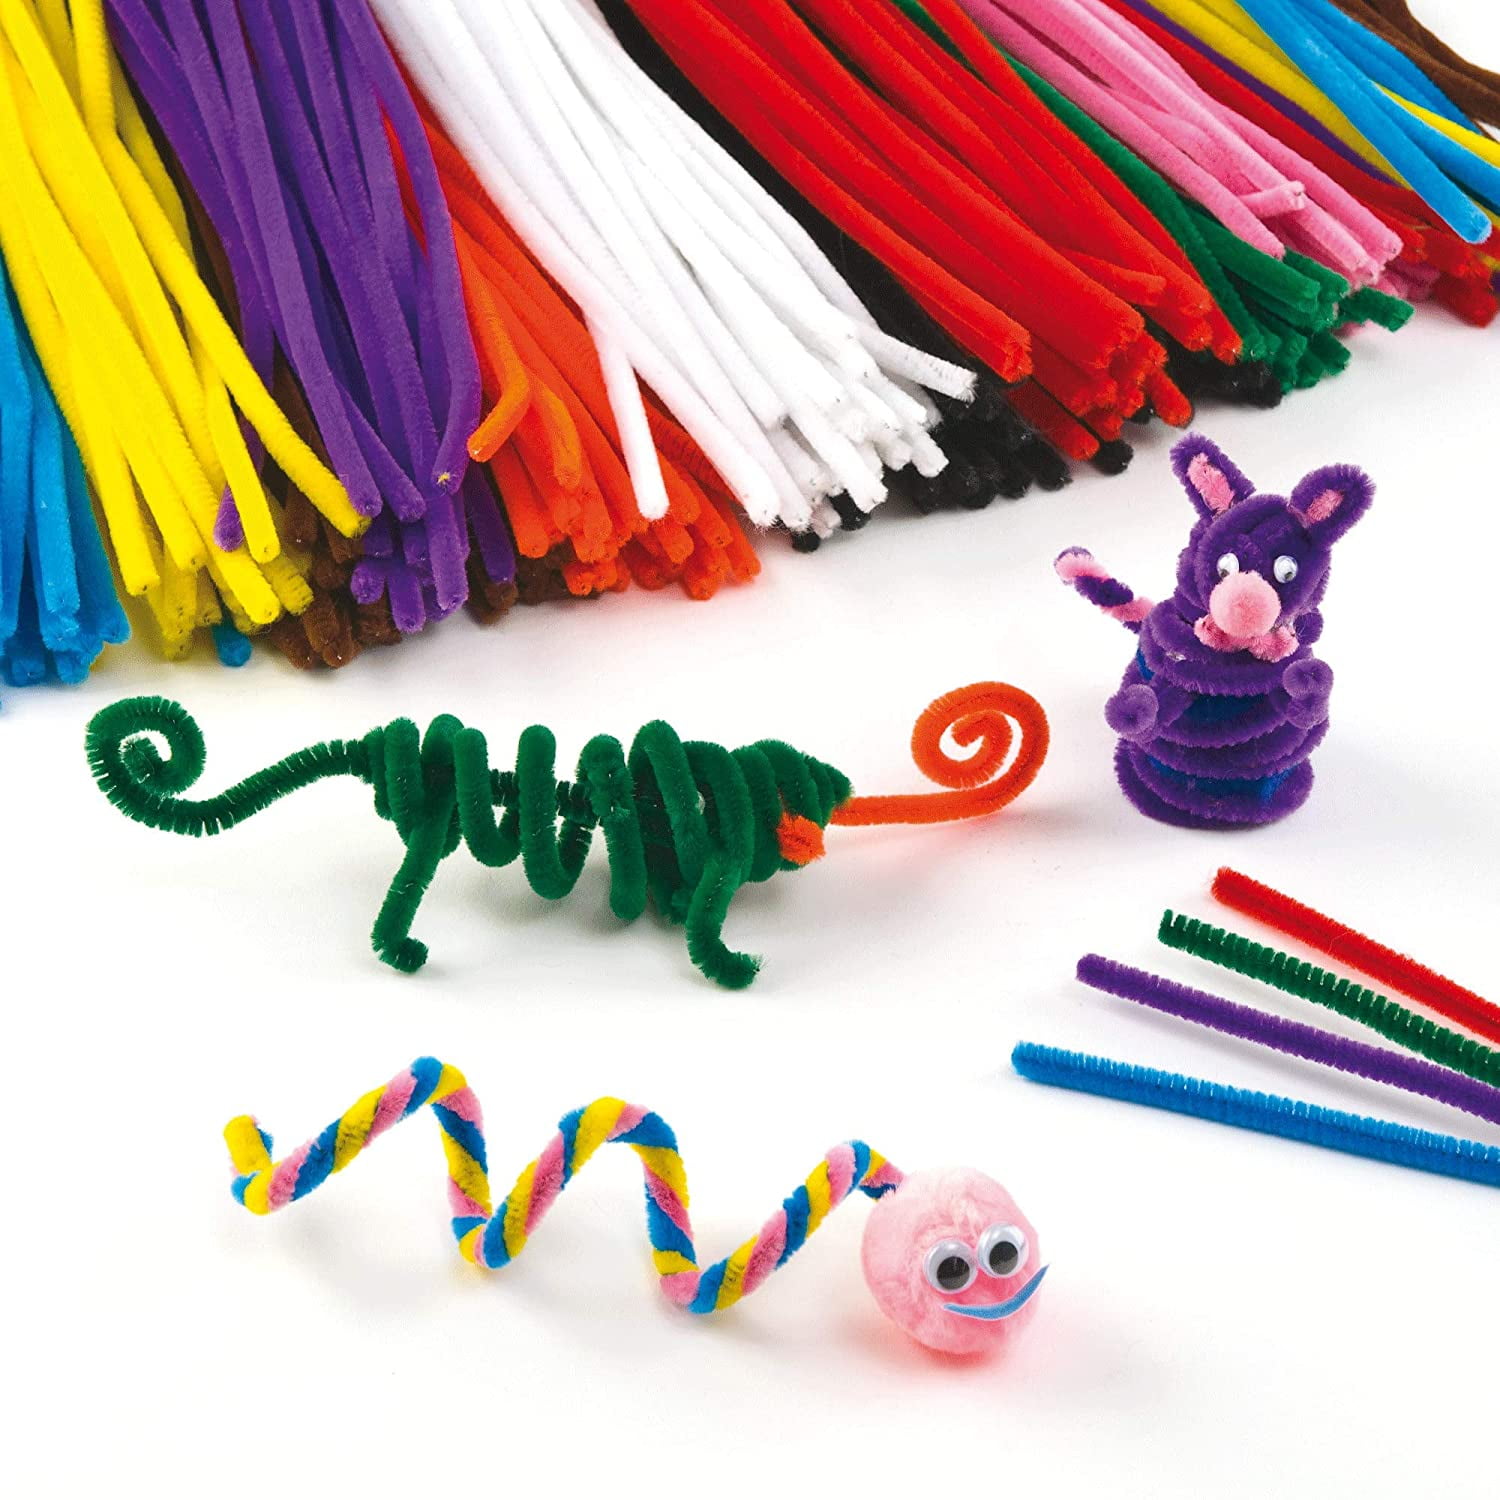 6 mm x 12 inch 1000 Pcs Pipe Cleaners Chenille Stems with 100 Accessories，10 Assorted Colors for DIY Art Craft Decorations